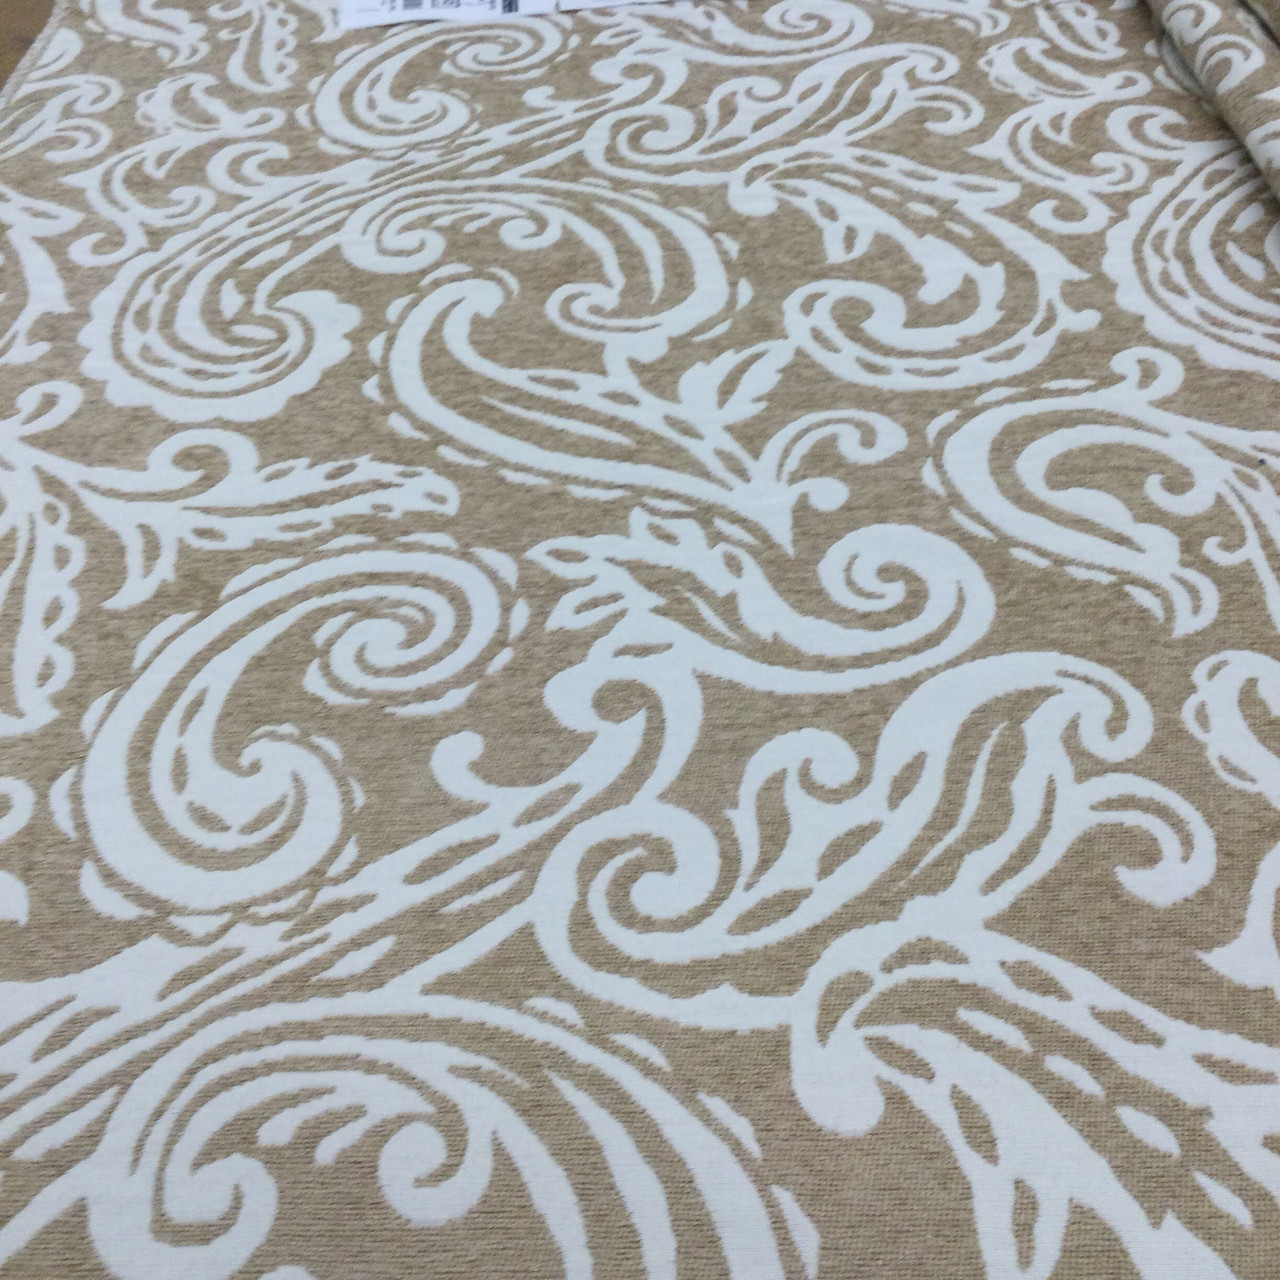 Taupe and Gray Contemporary Paisley Print Cotton Fabric by the Yard  Designer Drapery Curtain or Upholstery Fabric Tan and Gray Fabric M223